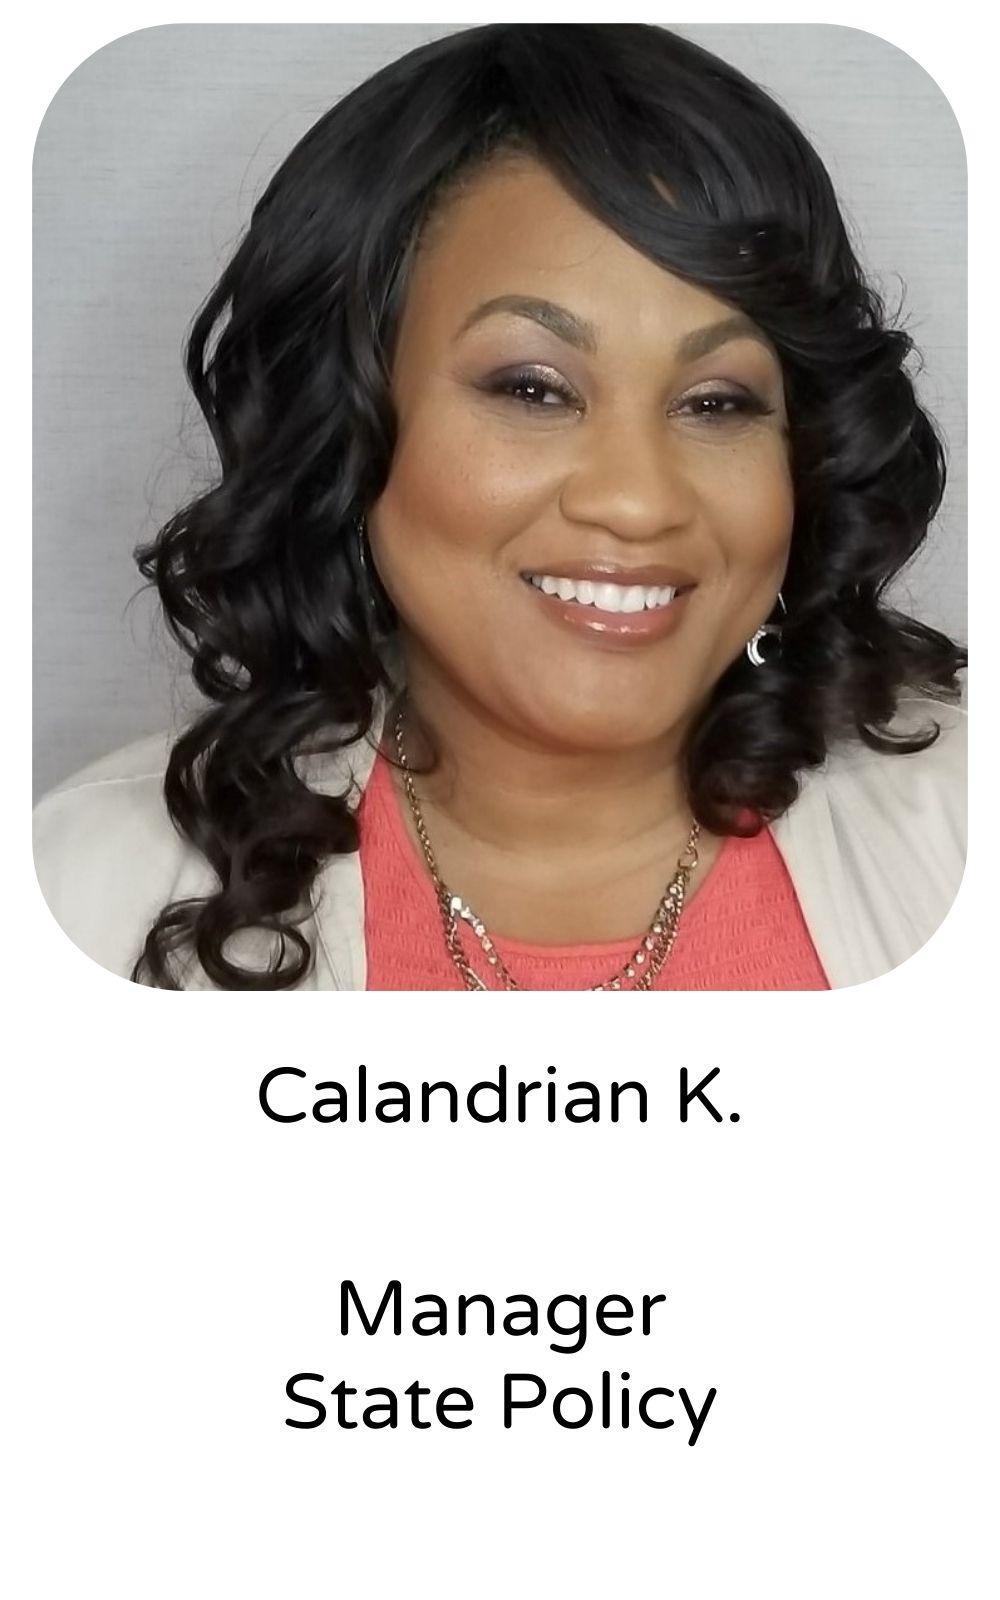 Calandrian K, Manager, State Policy